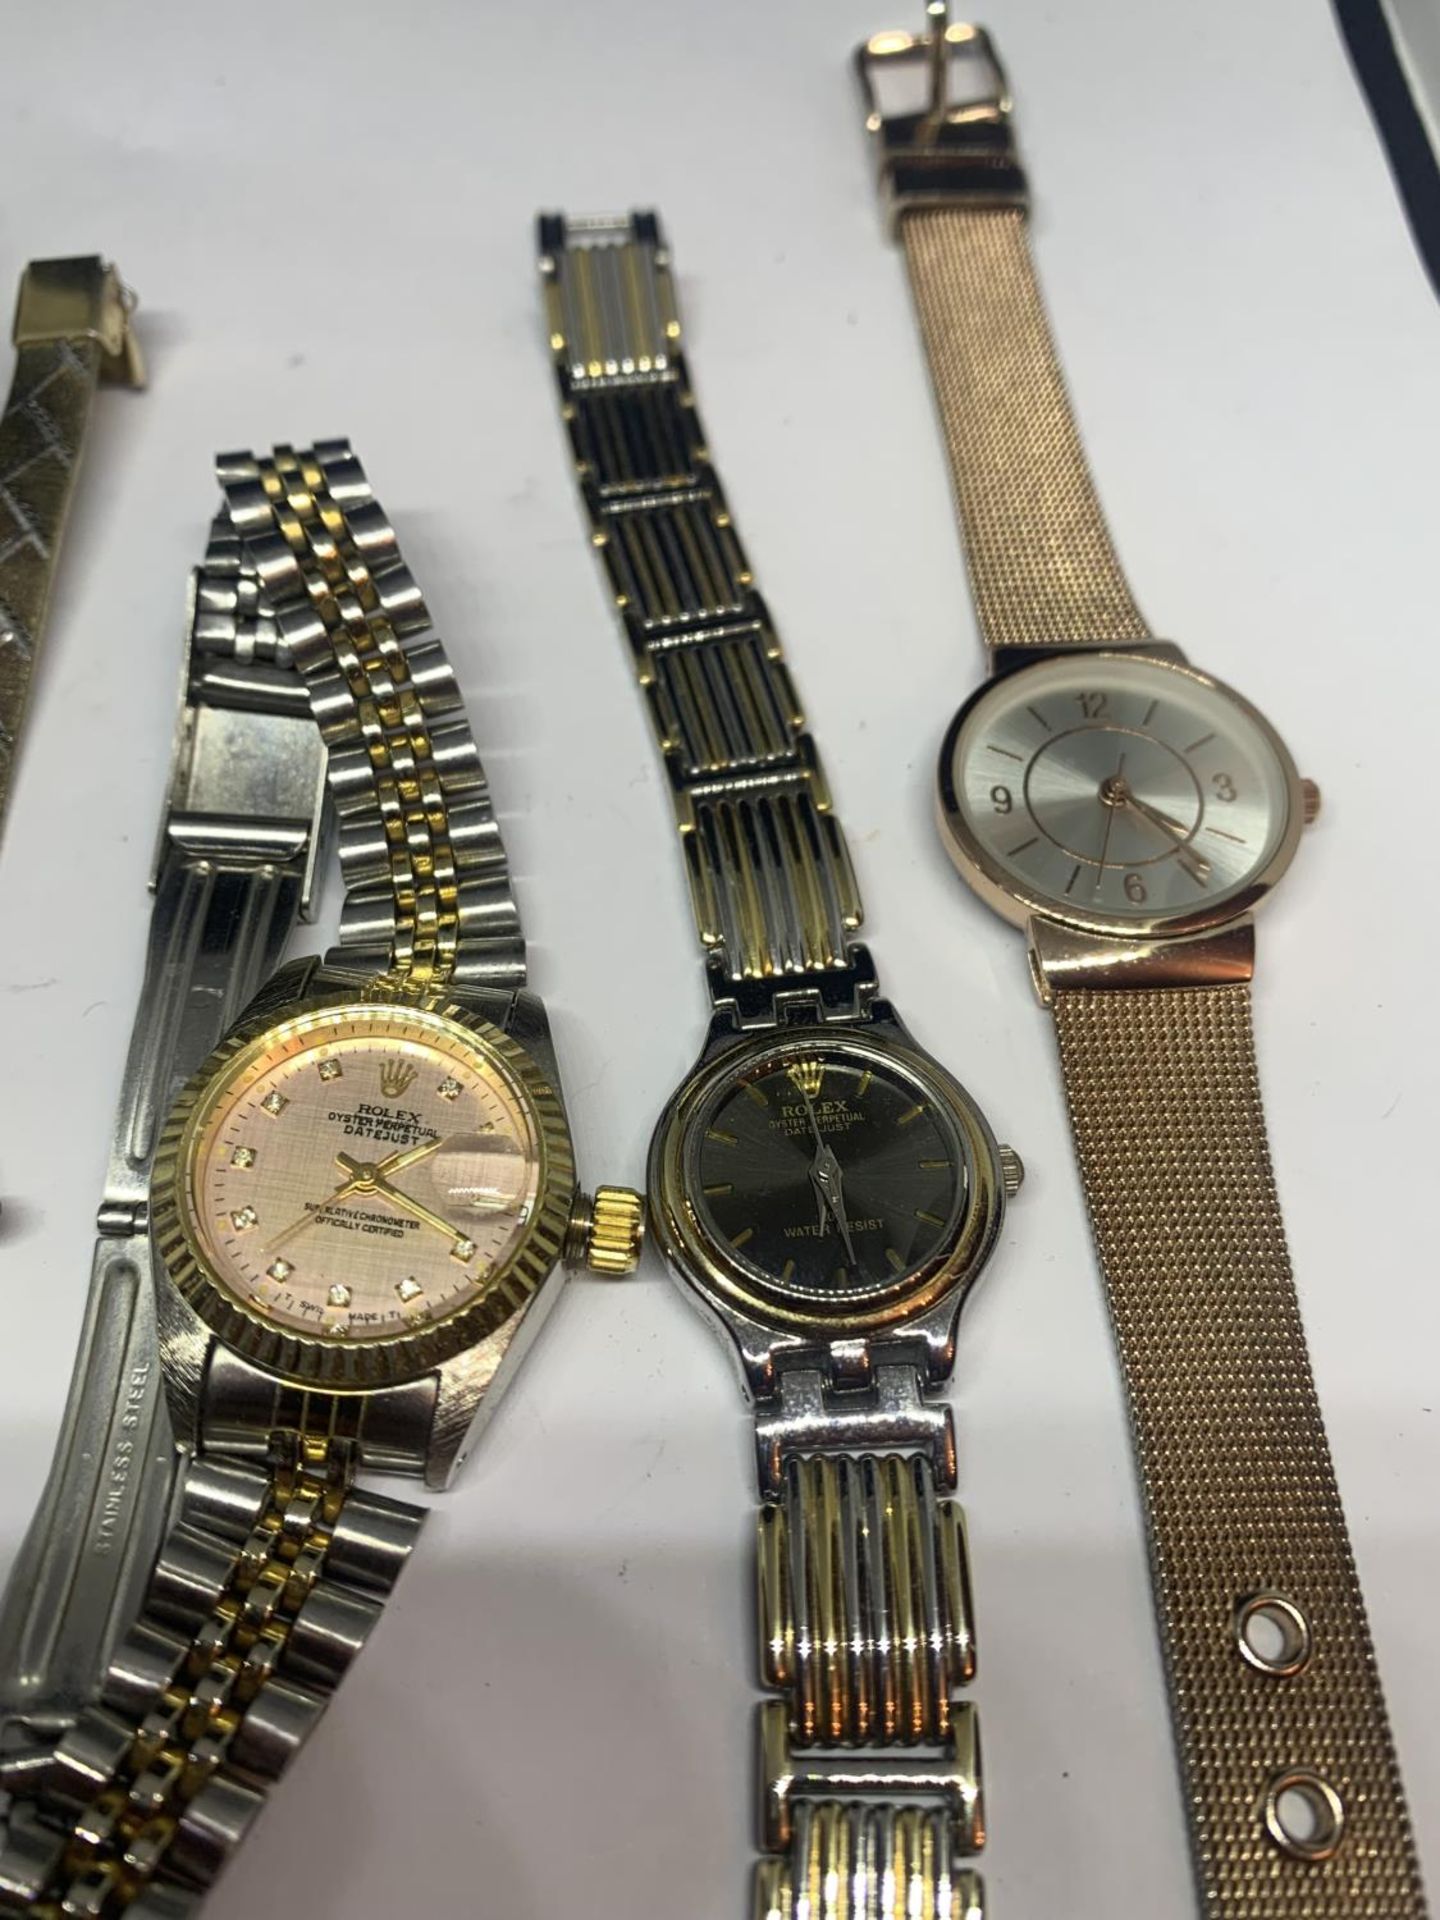 SIX VARIOUS FASHION WATCHES - Image 3 of 3